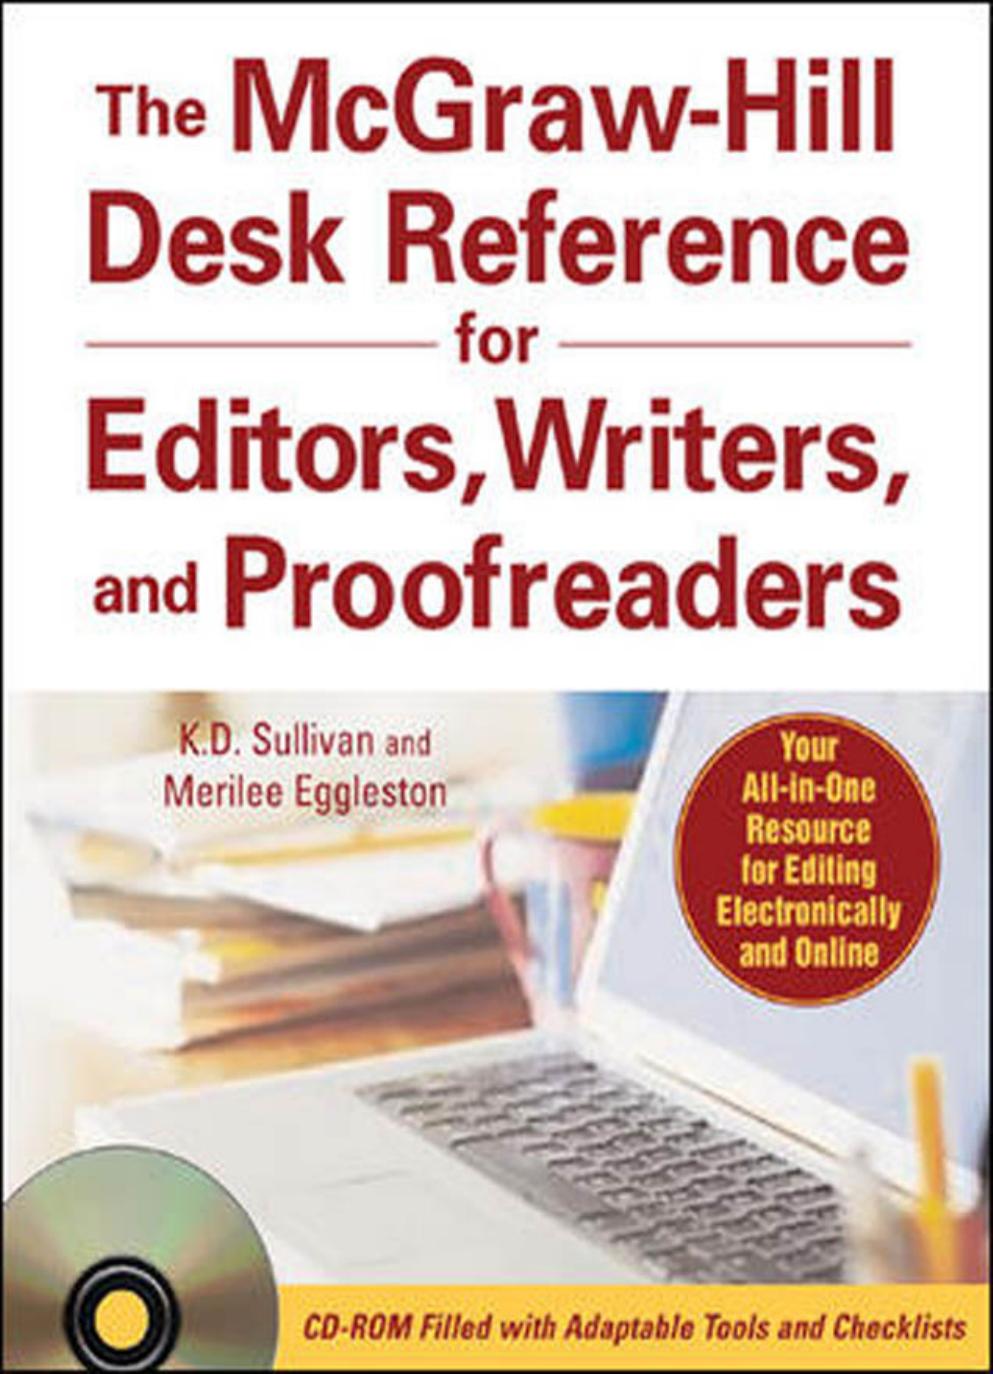 The McGraw-Hill Desk Reference for Editors, Writers, and Proofreaders by K. D. Sullivan Merilee Eggleston